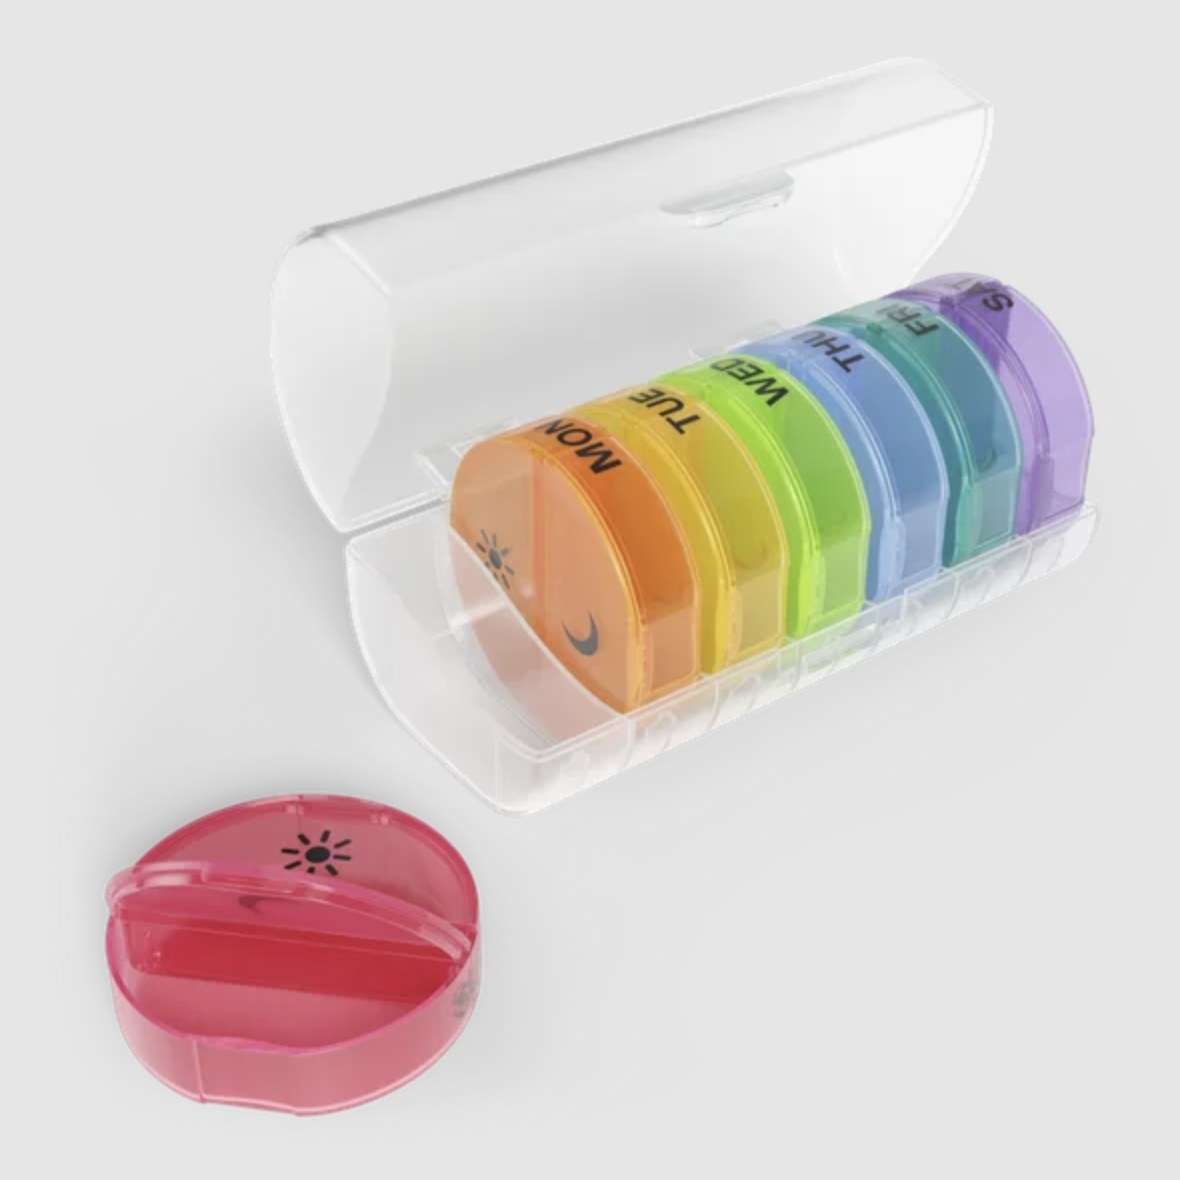 The pill organizer with different colored pop-out containers for each day of the week, each with two compartments for night (moon) and day (sun)